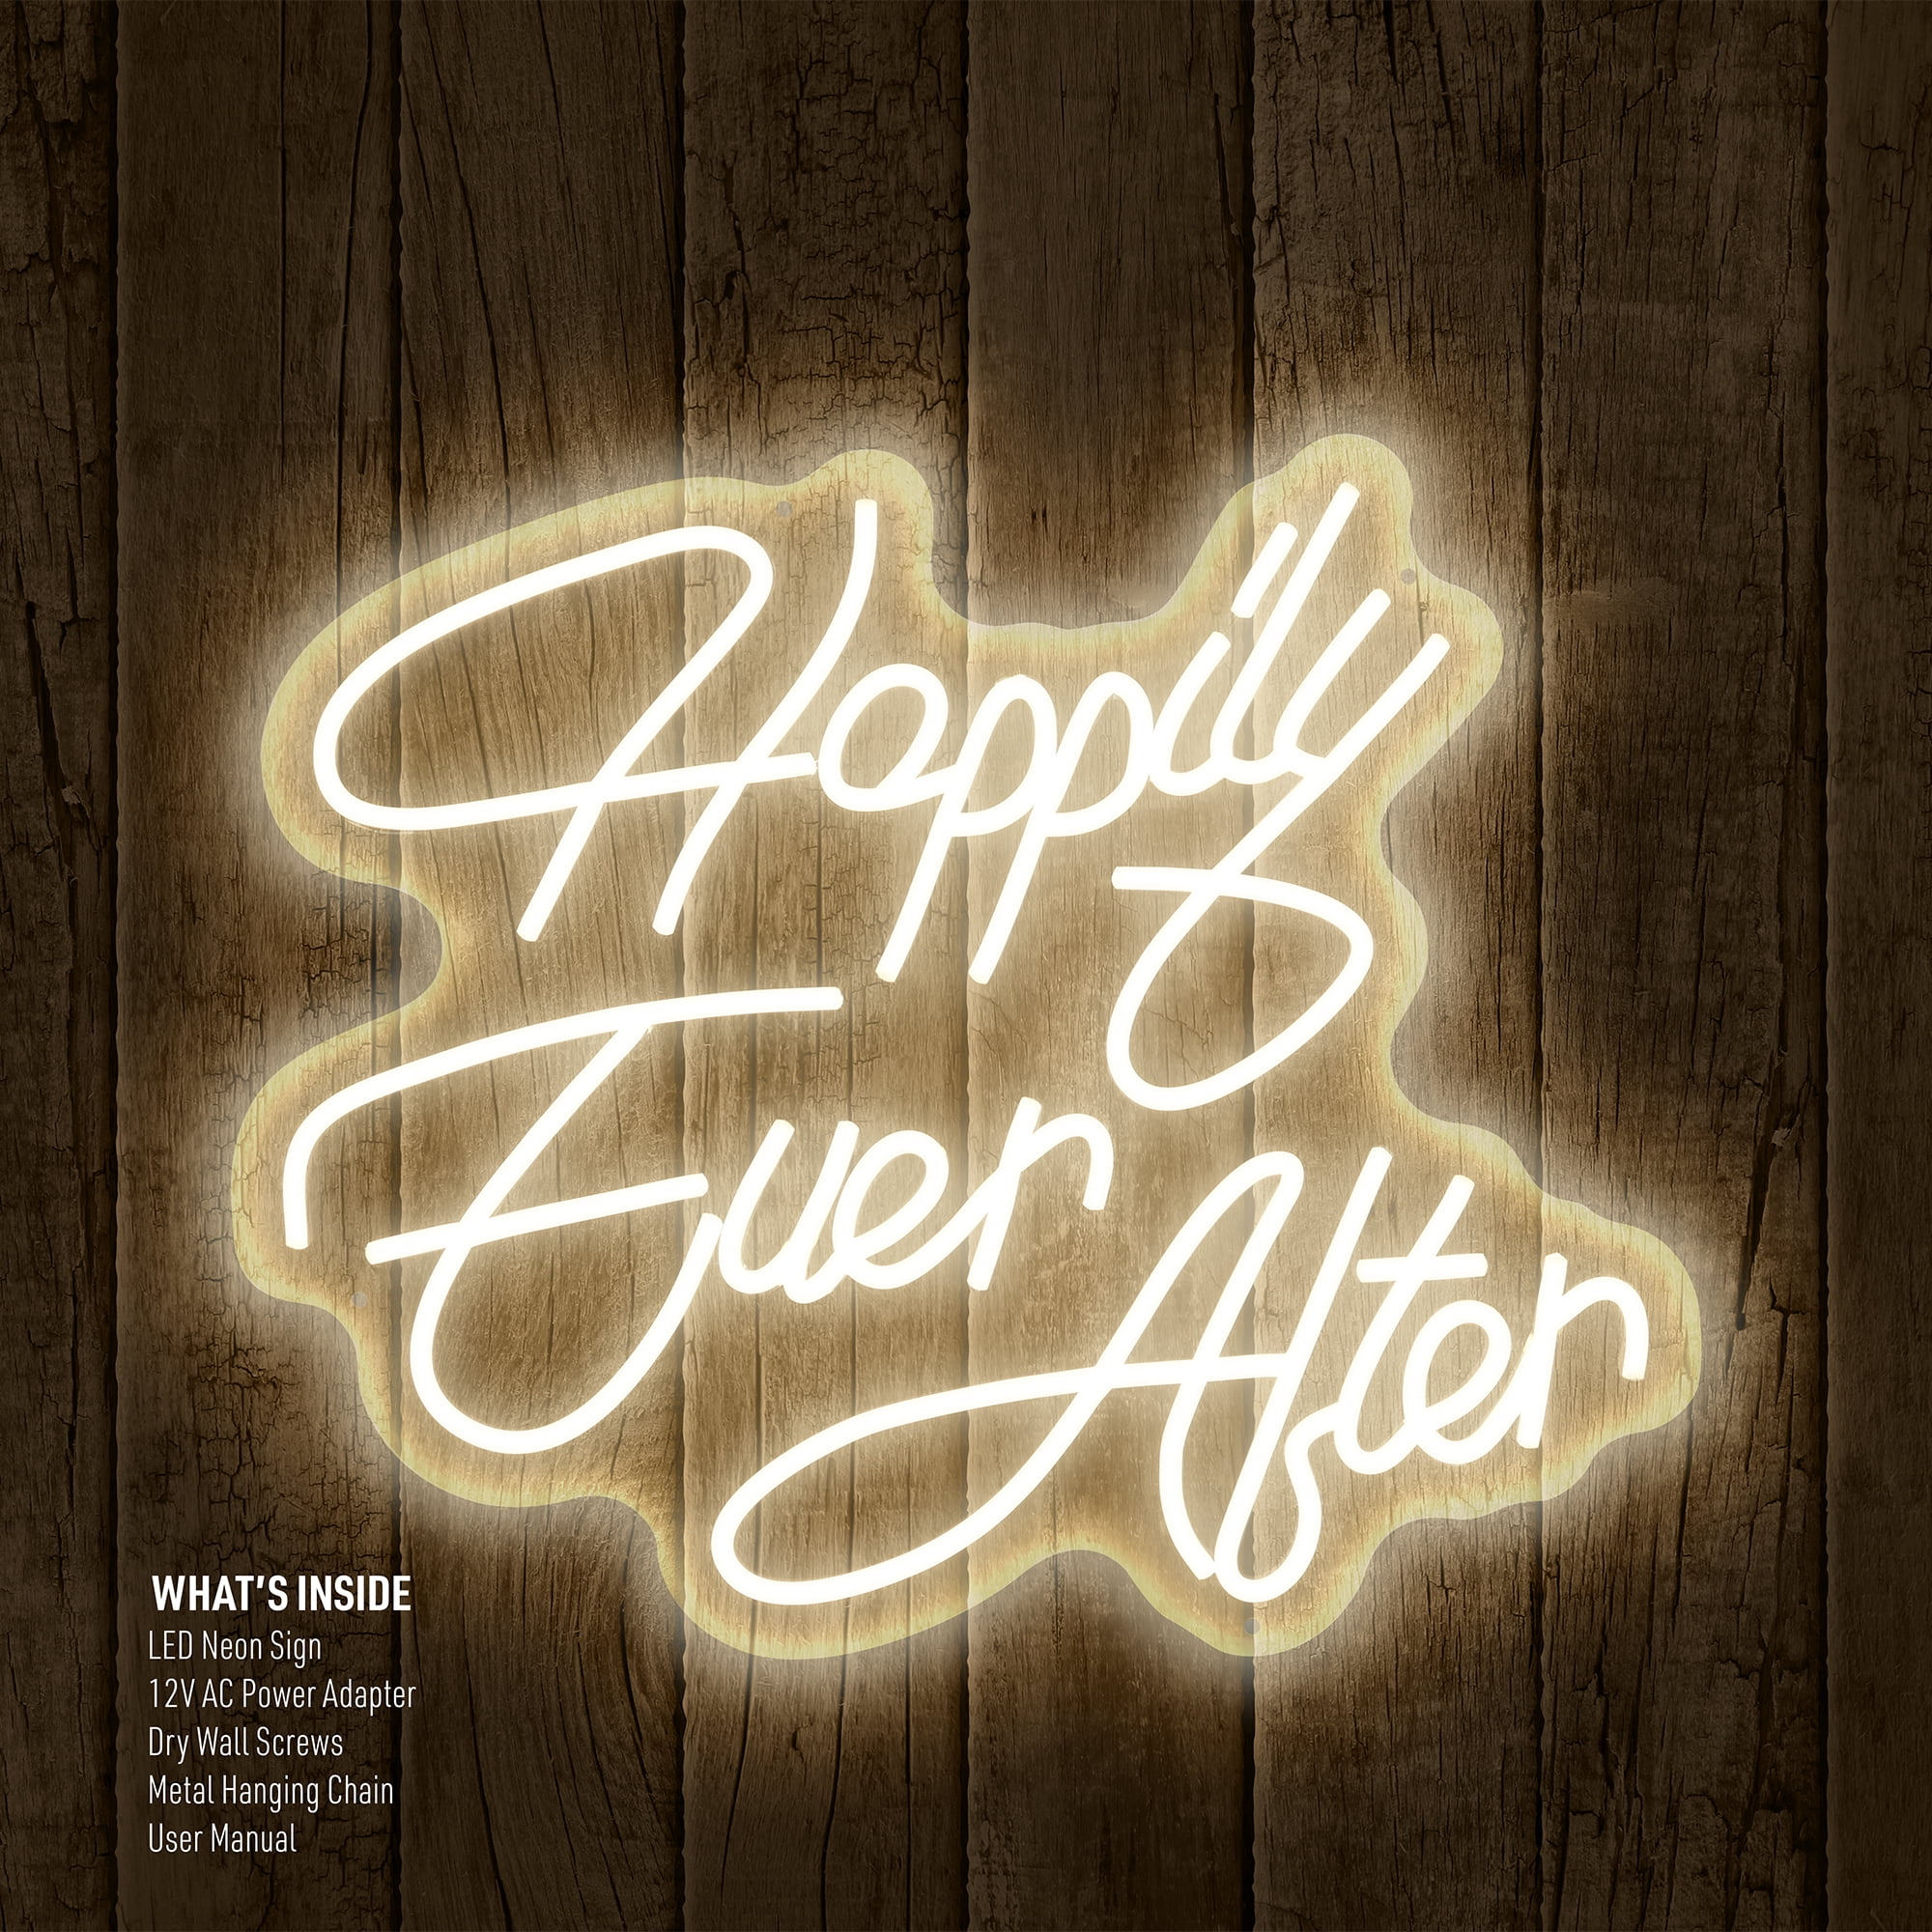 Xtreme Lit 20.2 17.26 'Happily Ever after' Warm White LED Neon Sign,  Plastic Hanging Wall Art 